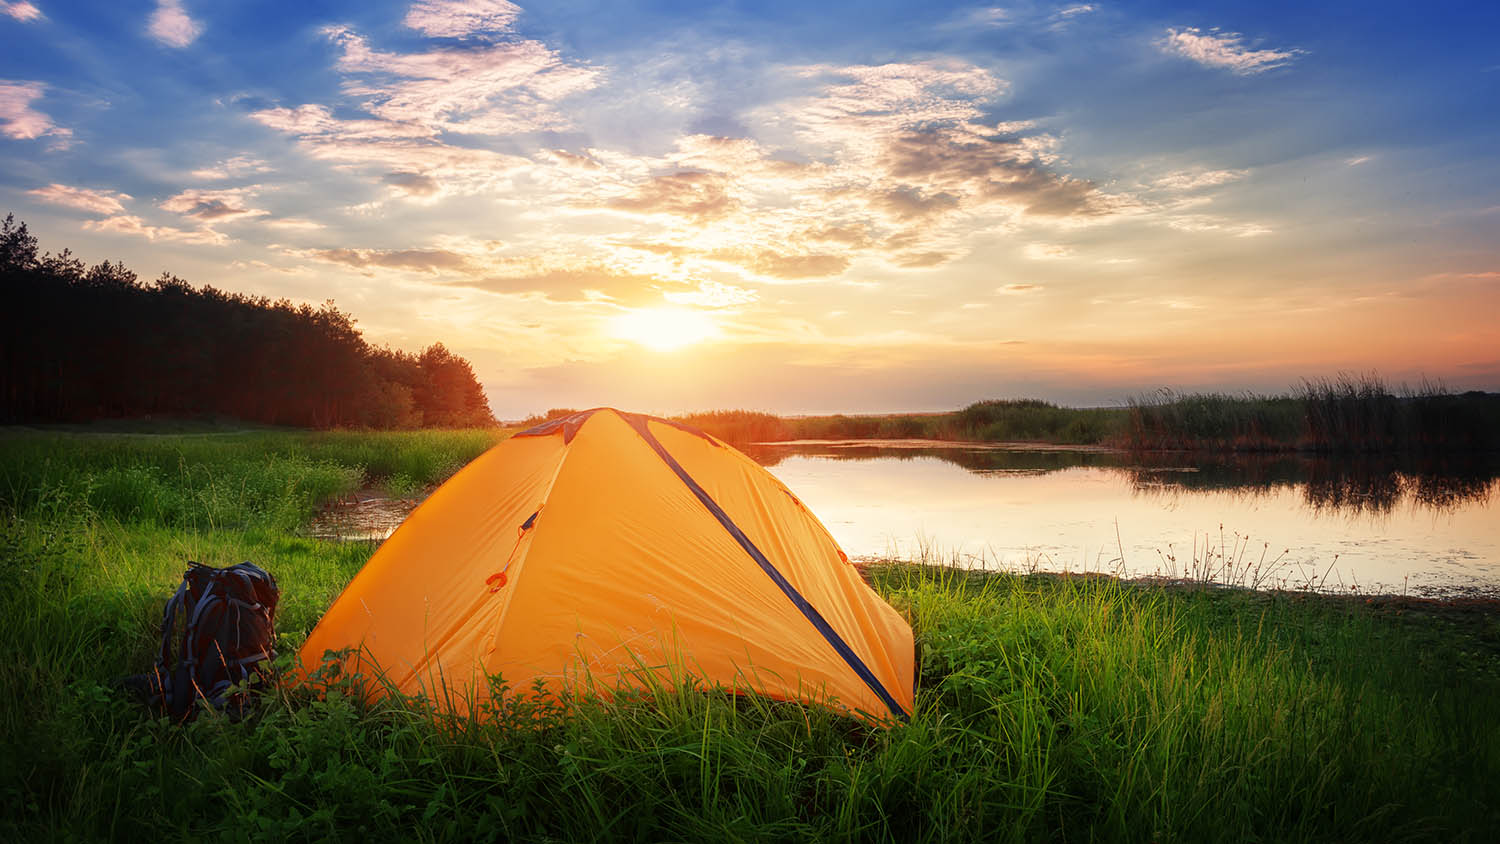 sunset photo of a tent and backpack in long grass next to a small body of water